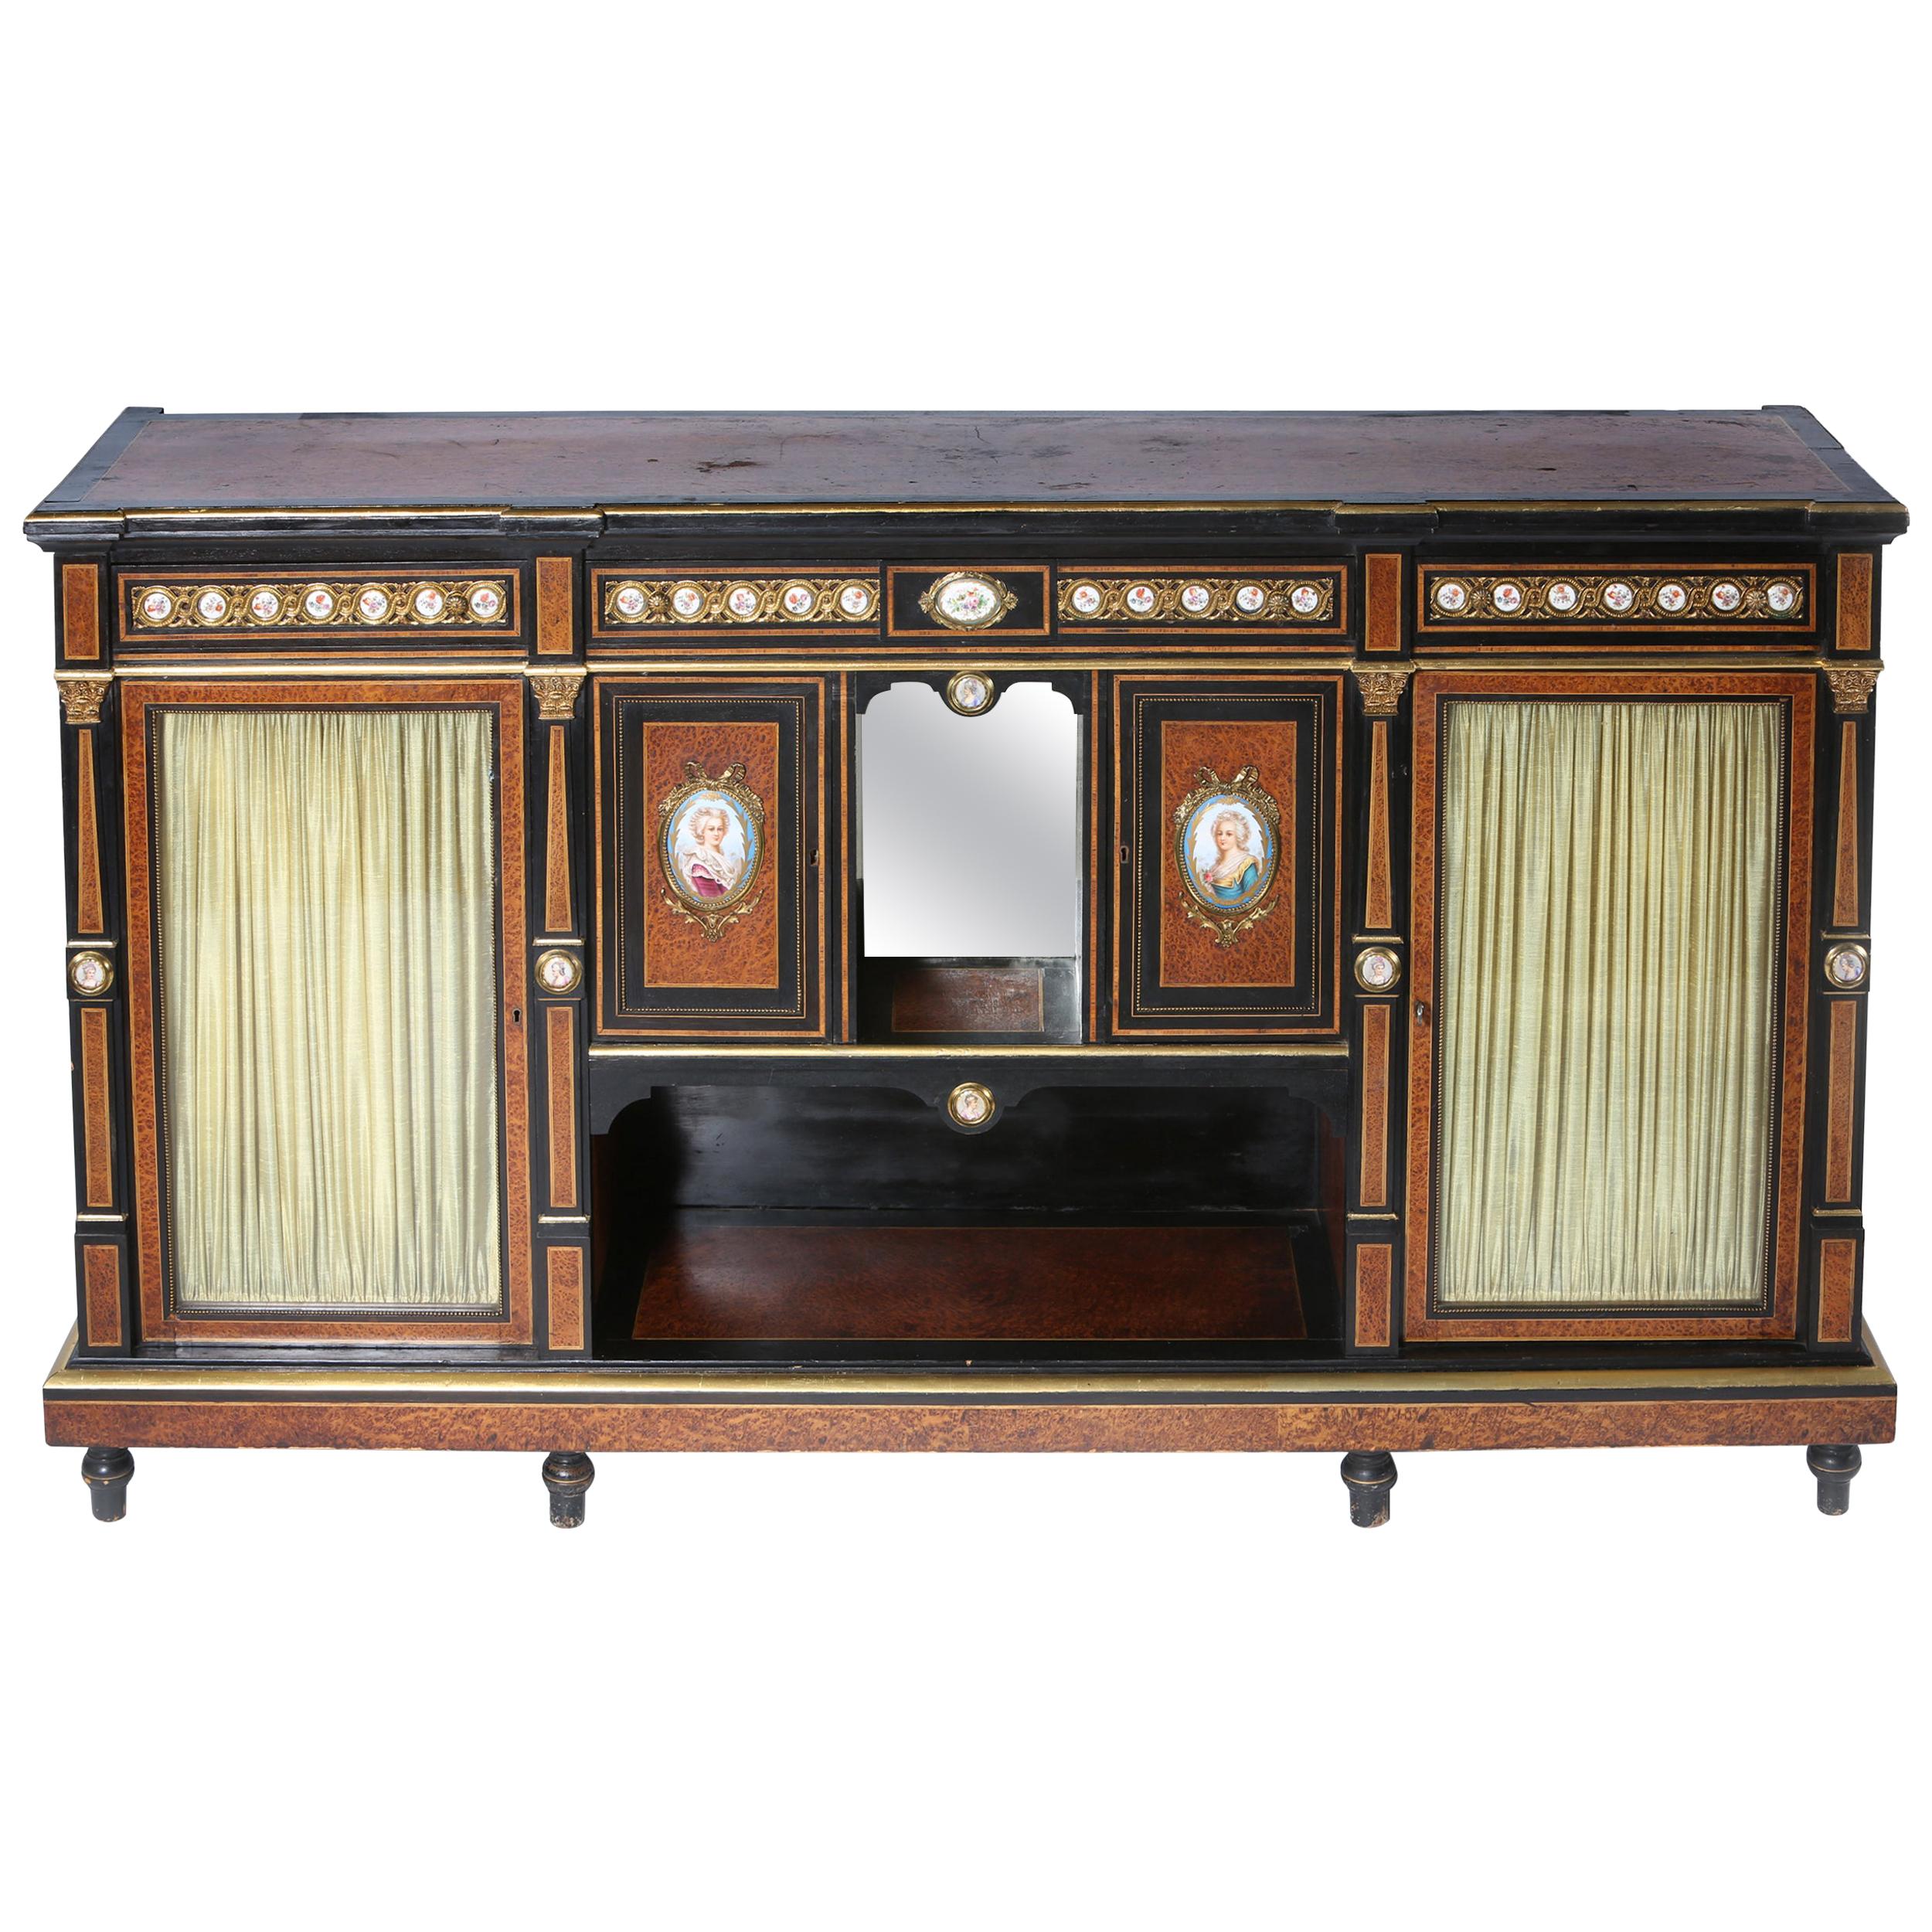 Early 19th Century Louis XVI Style Sideboard / Cabinet For Sale